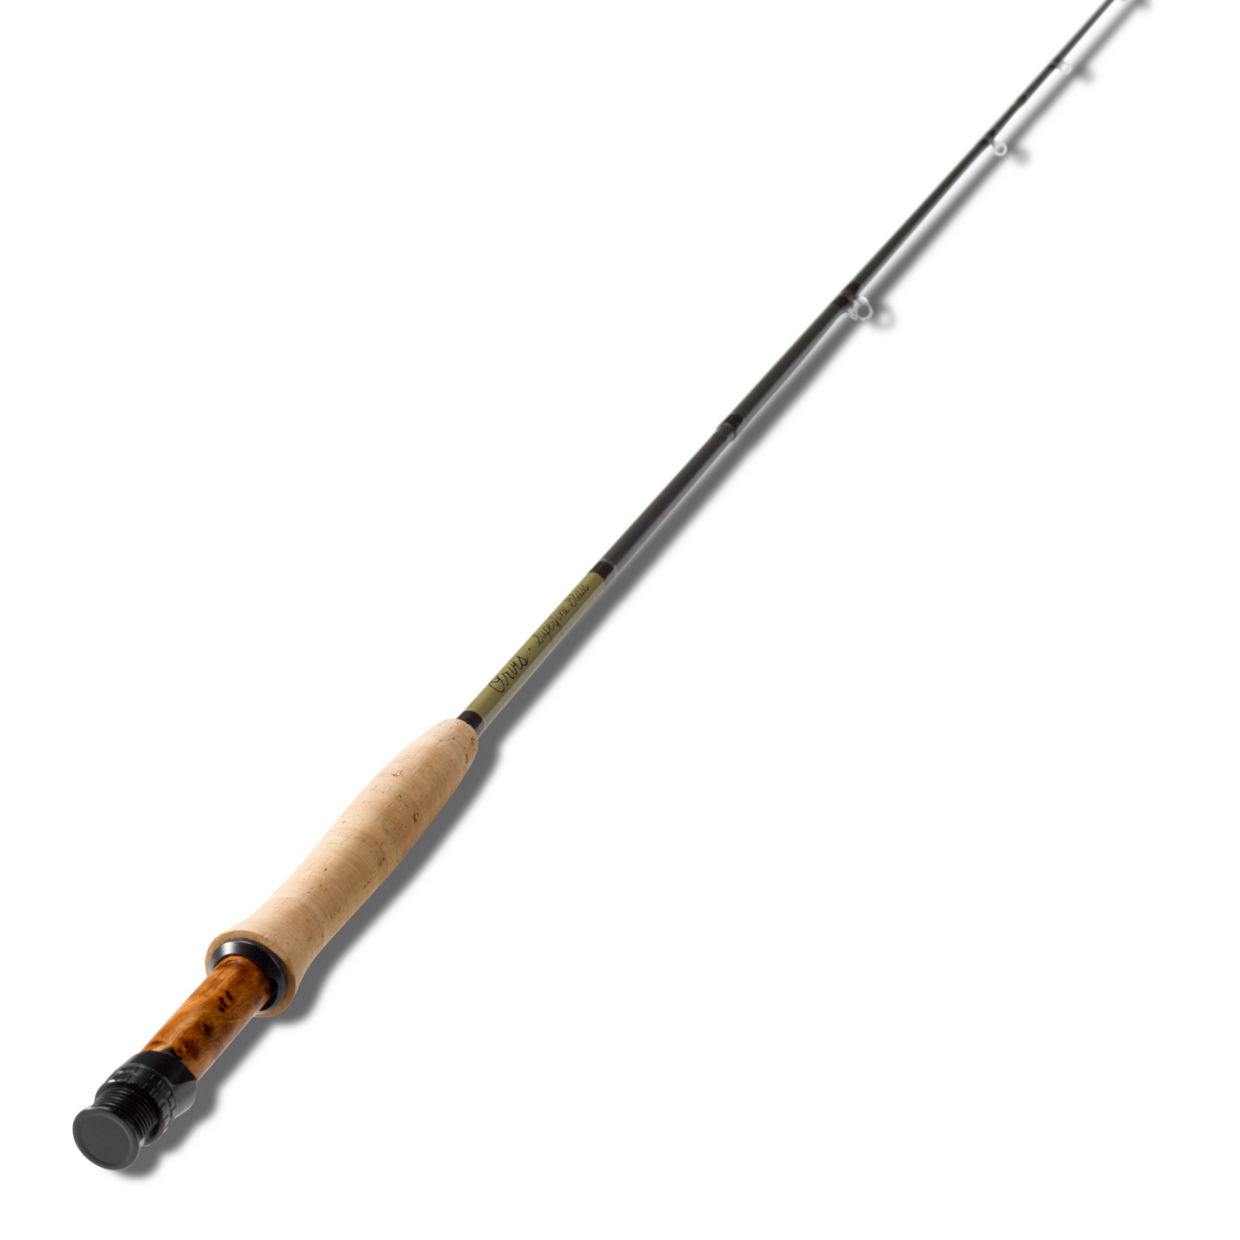 Superfine® Glass 805-4 Fly-Fishing Rod Size 5-Weight. 8' Graphite Orvis